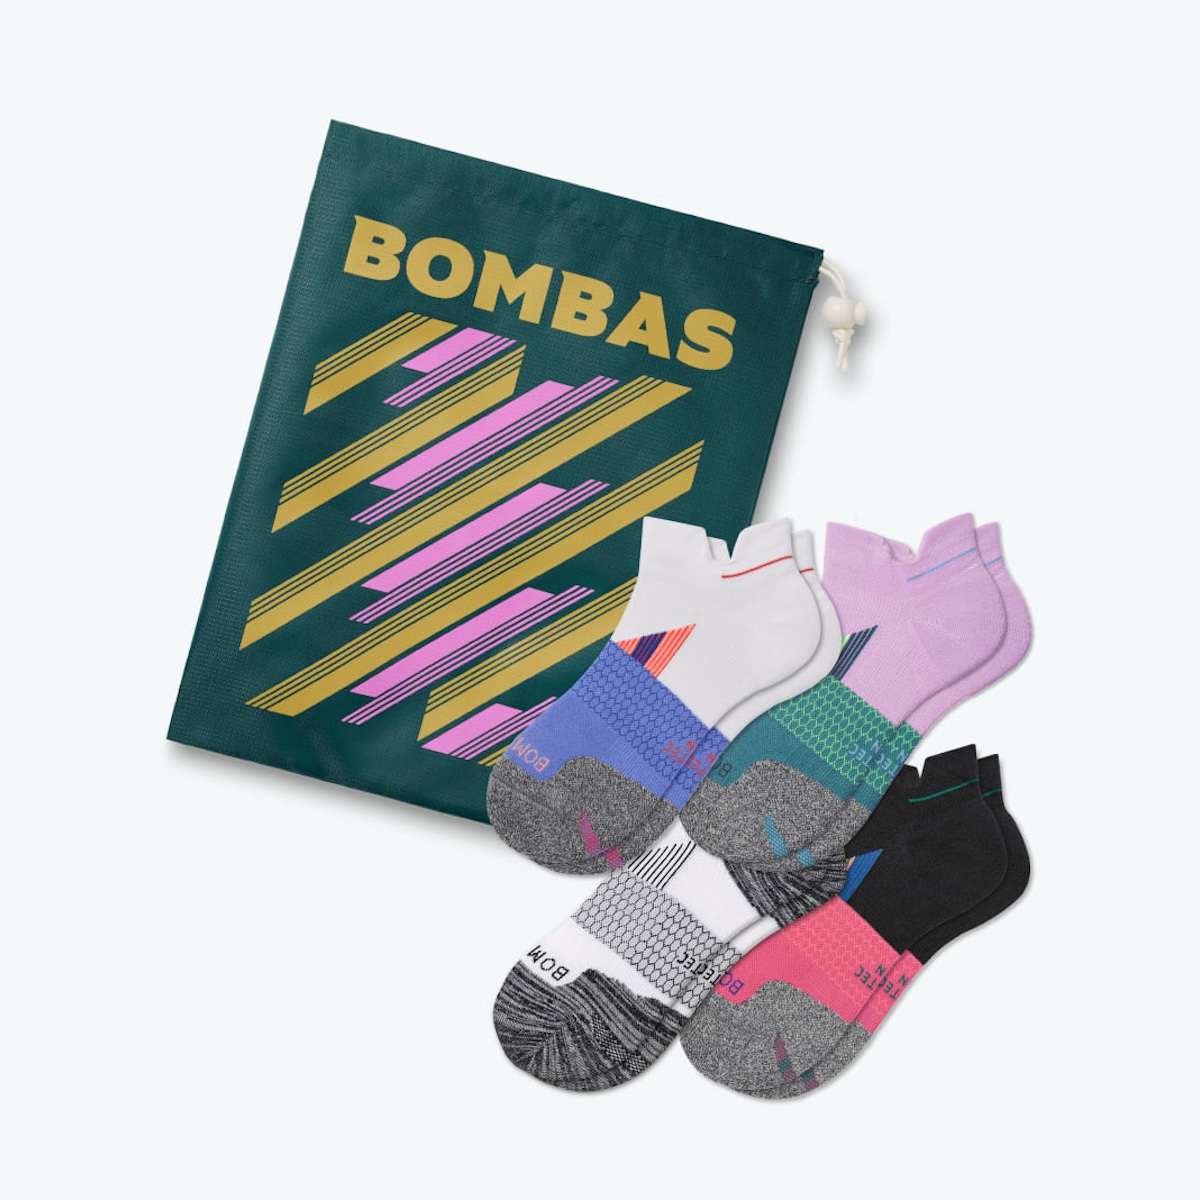 Bombas Gift Guide